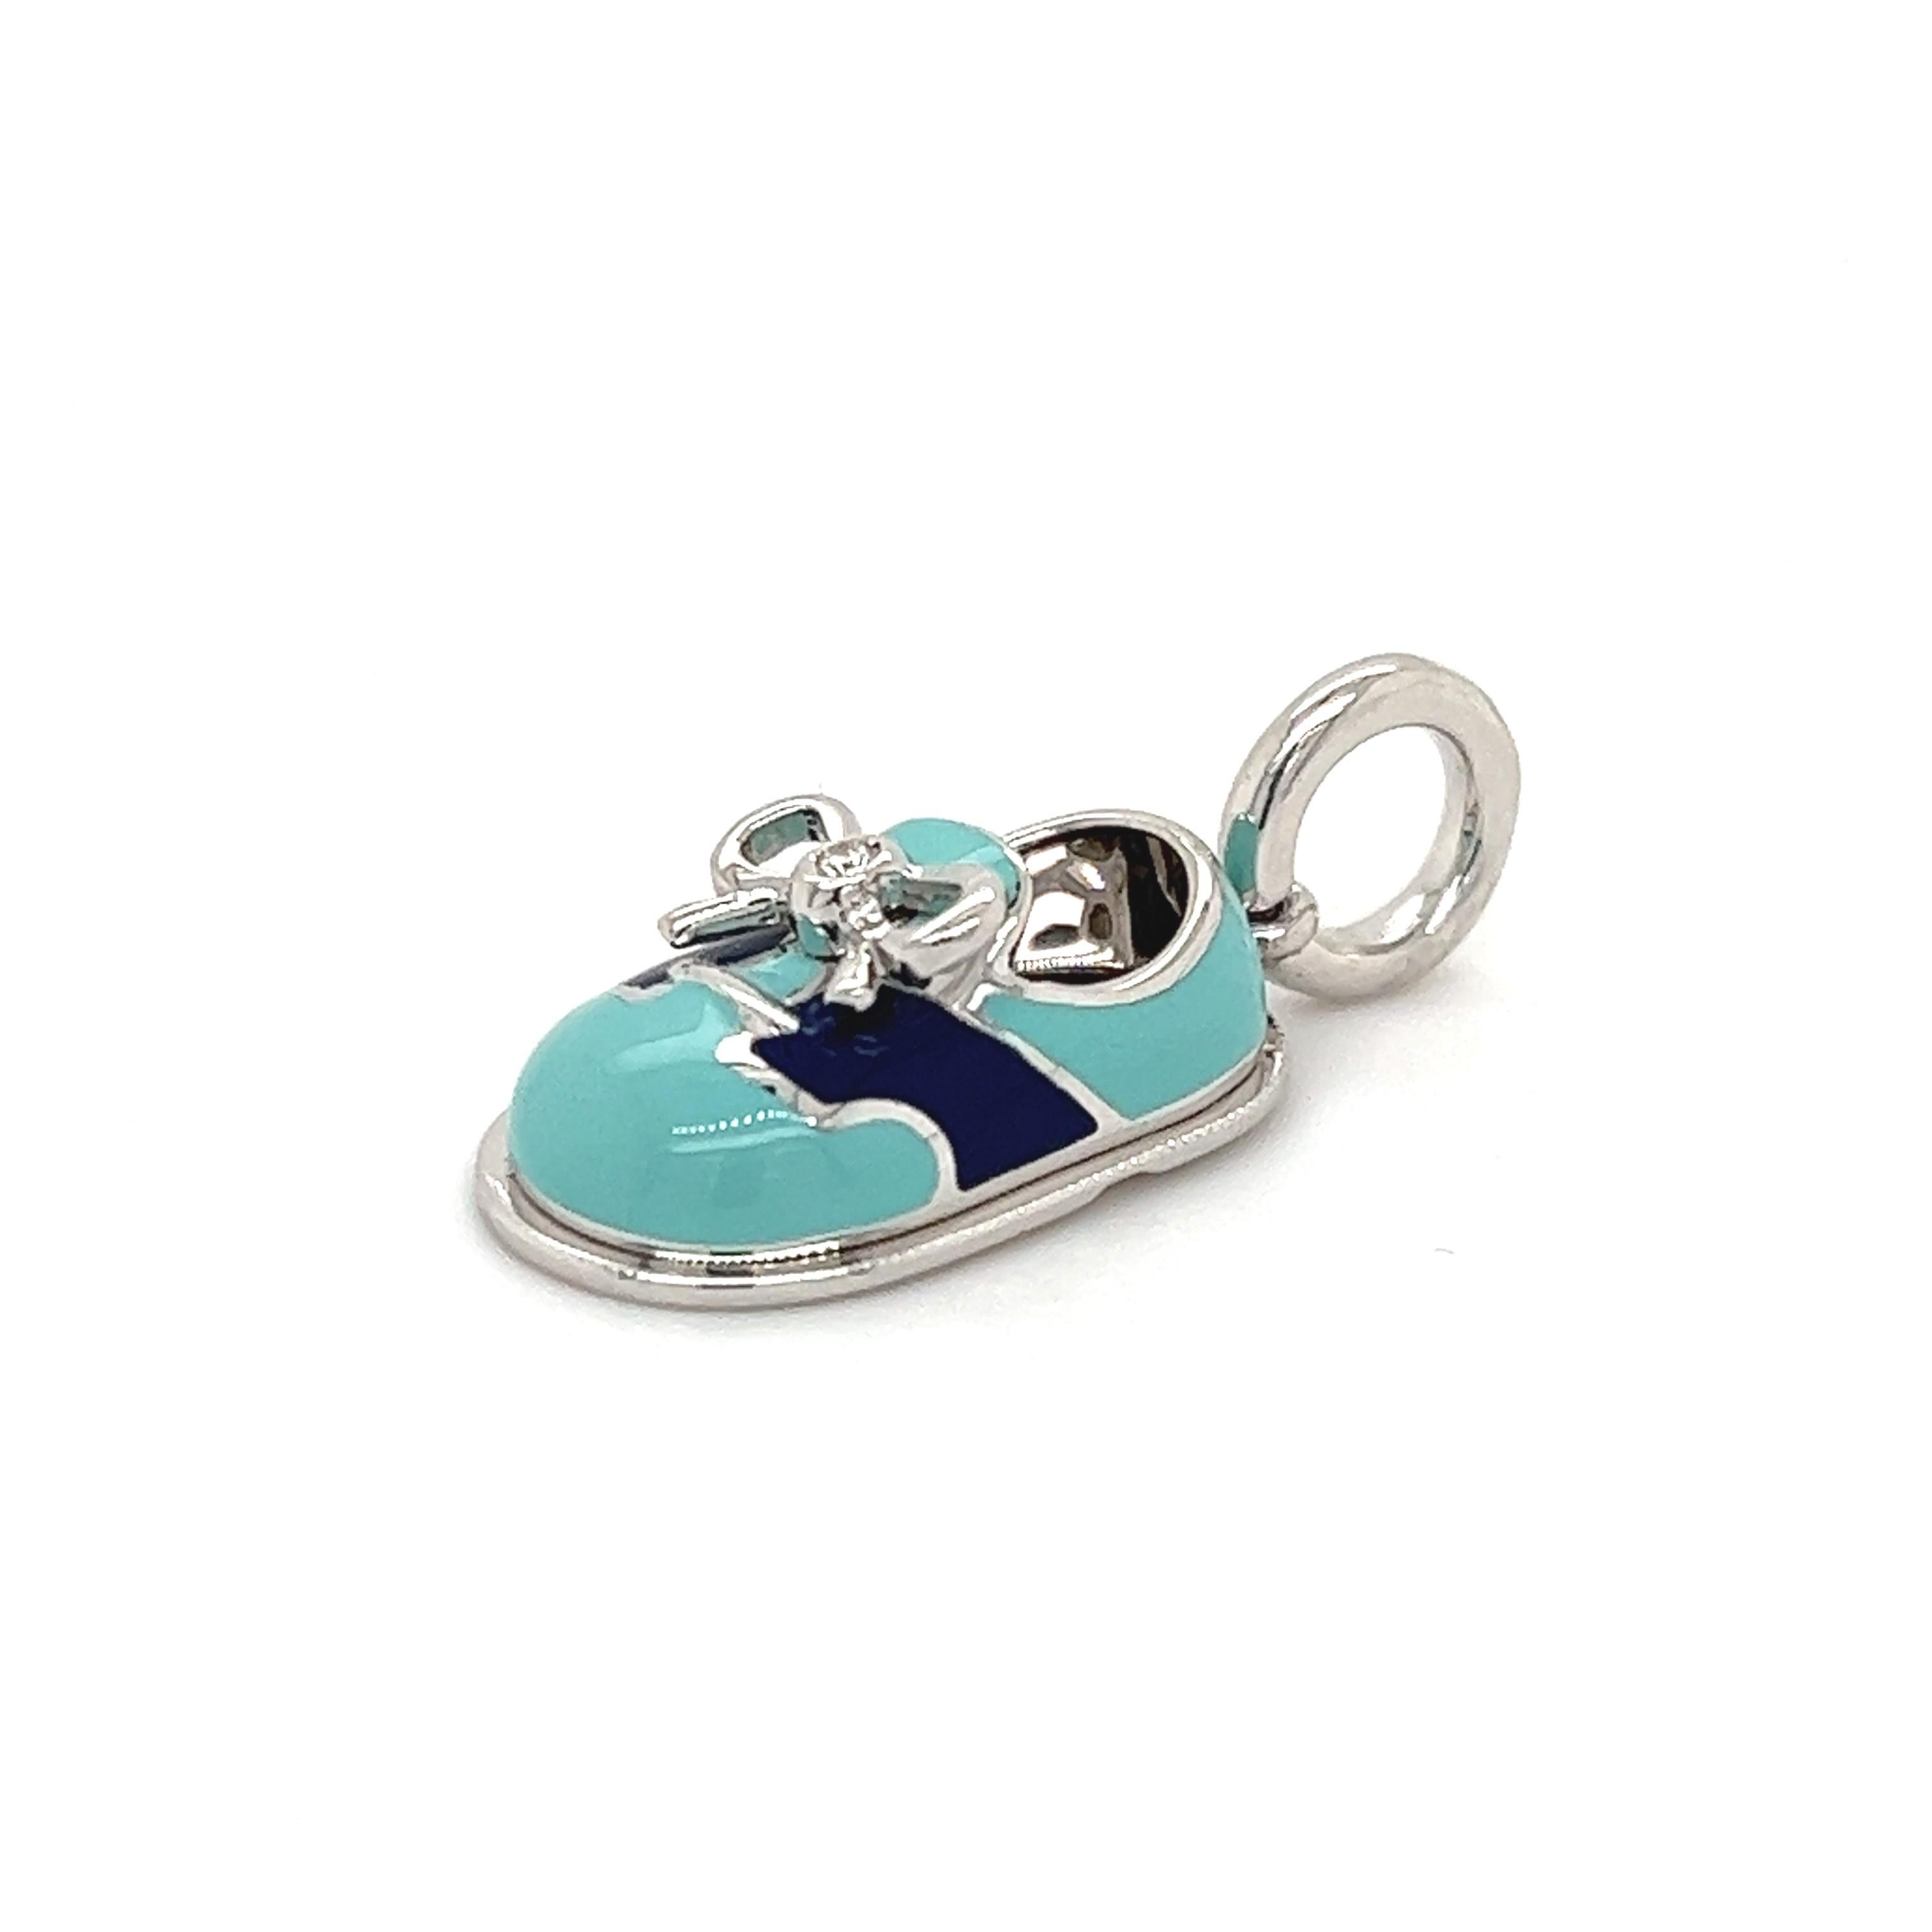 Celebrate a sweet milestone with the help of this opulent Aaron Basha pendant. Shaped like a baby shoe, this piece measures 1” long and is accented by charming blue and aqua enamel. It’s made from lustrous 18k white gold and can be attached to any